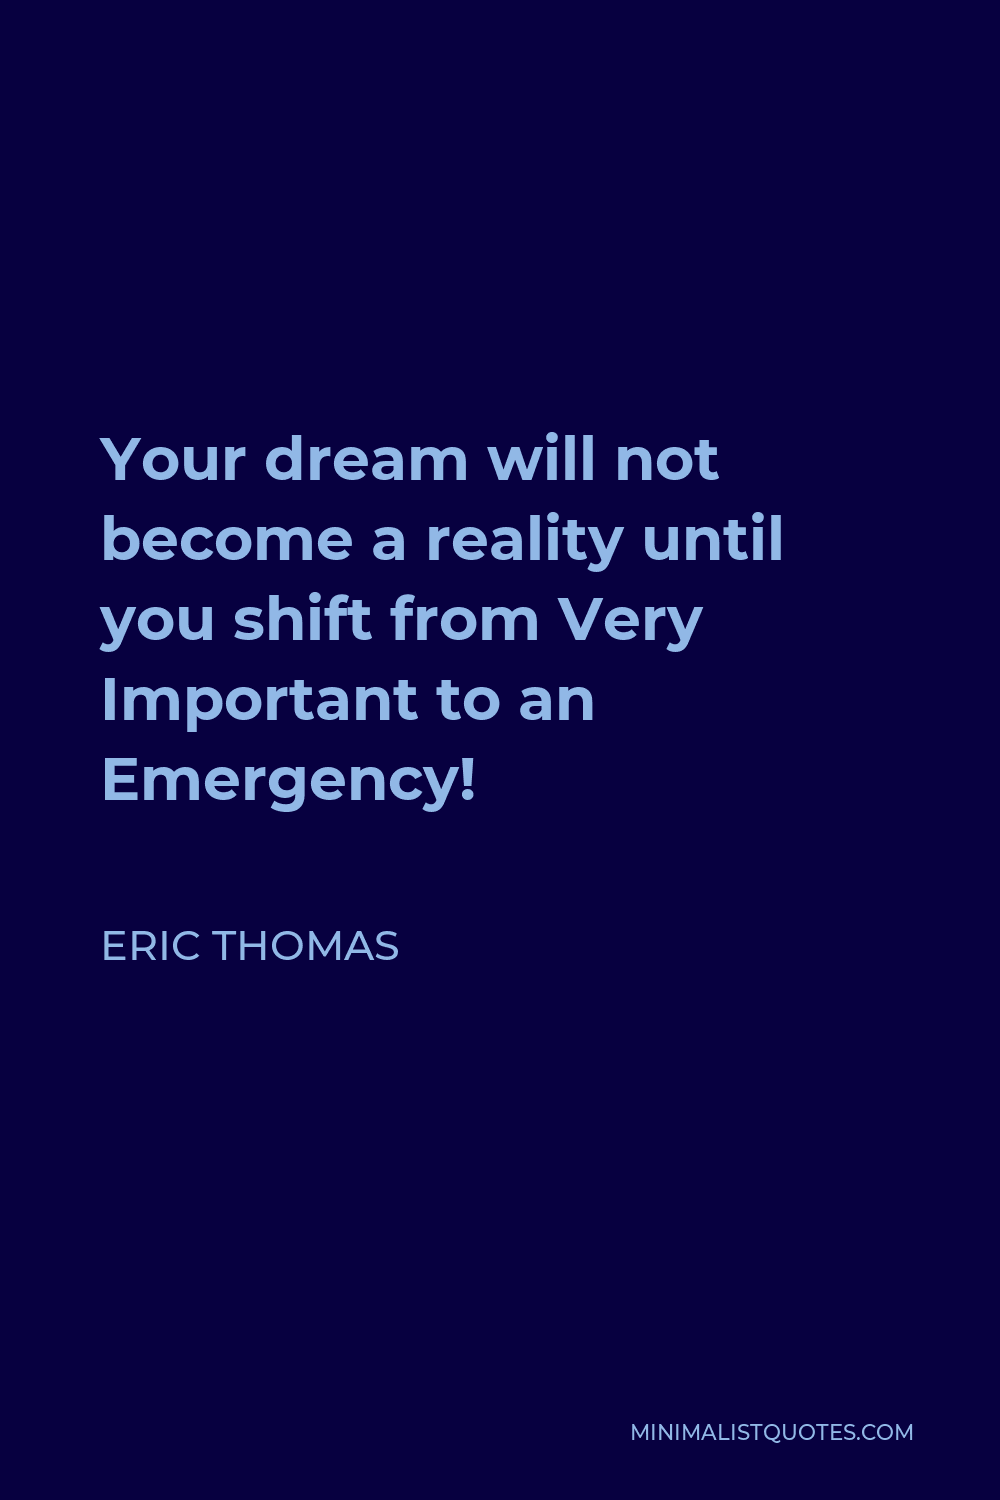 Eric Thomas Quote - Your dream will not become a reality until you shift from Very Important to an Emergency!